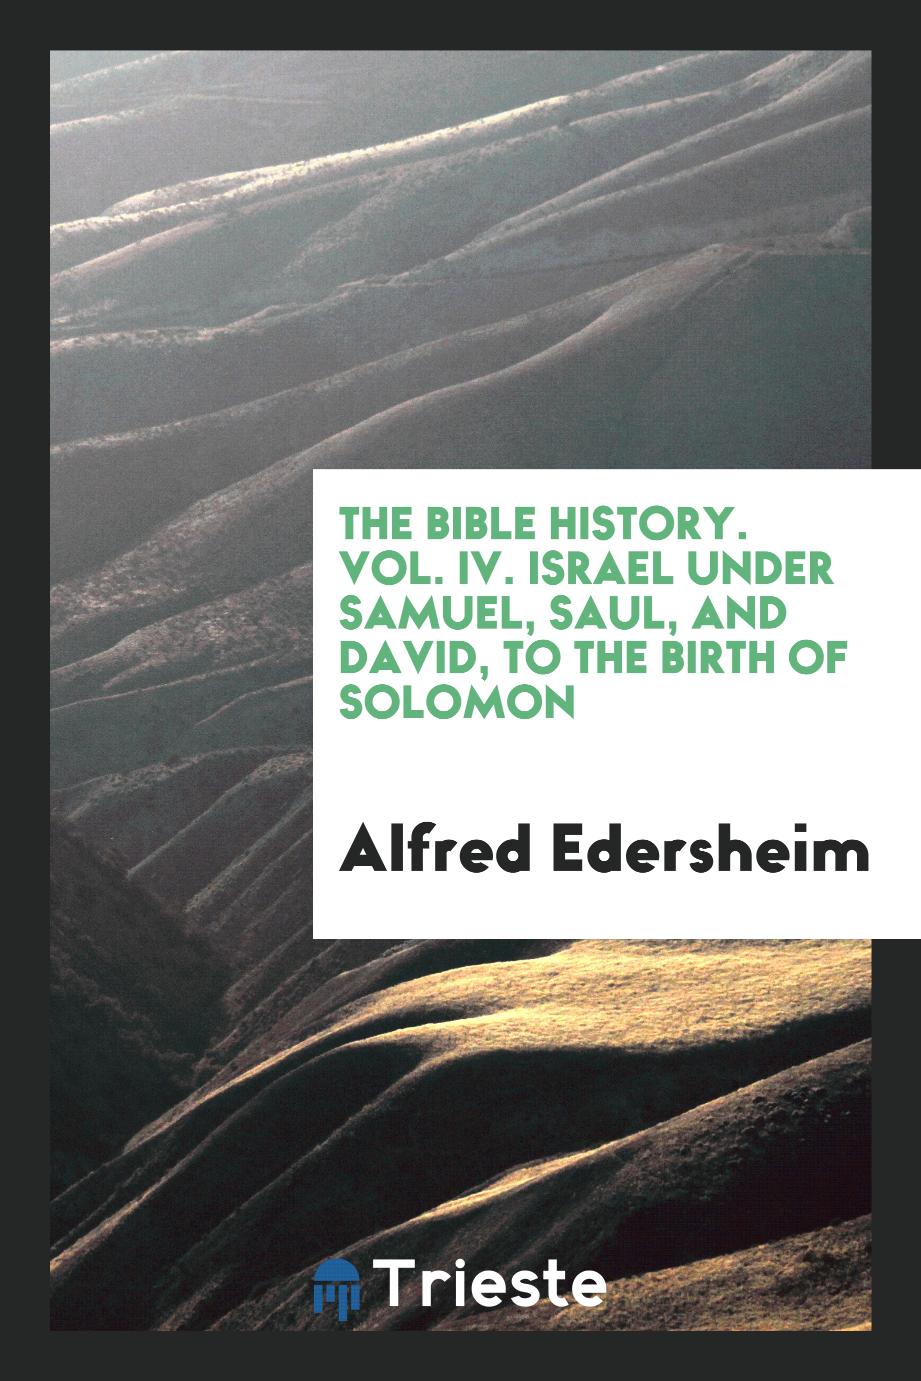 The Bible history. Vol. IV. Israel under Samuel, Saul, and David, to the birth of Solomon